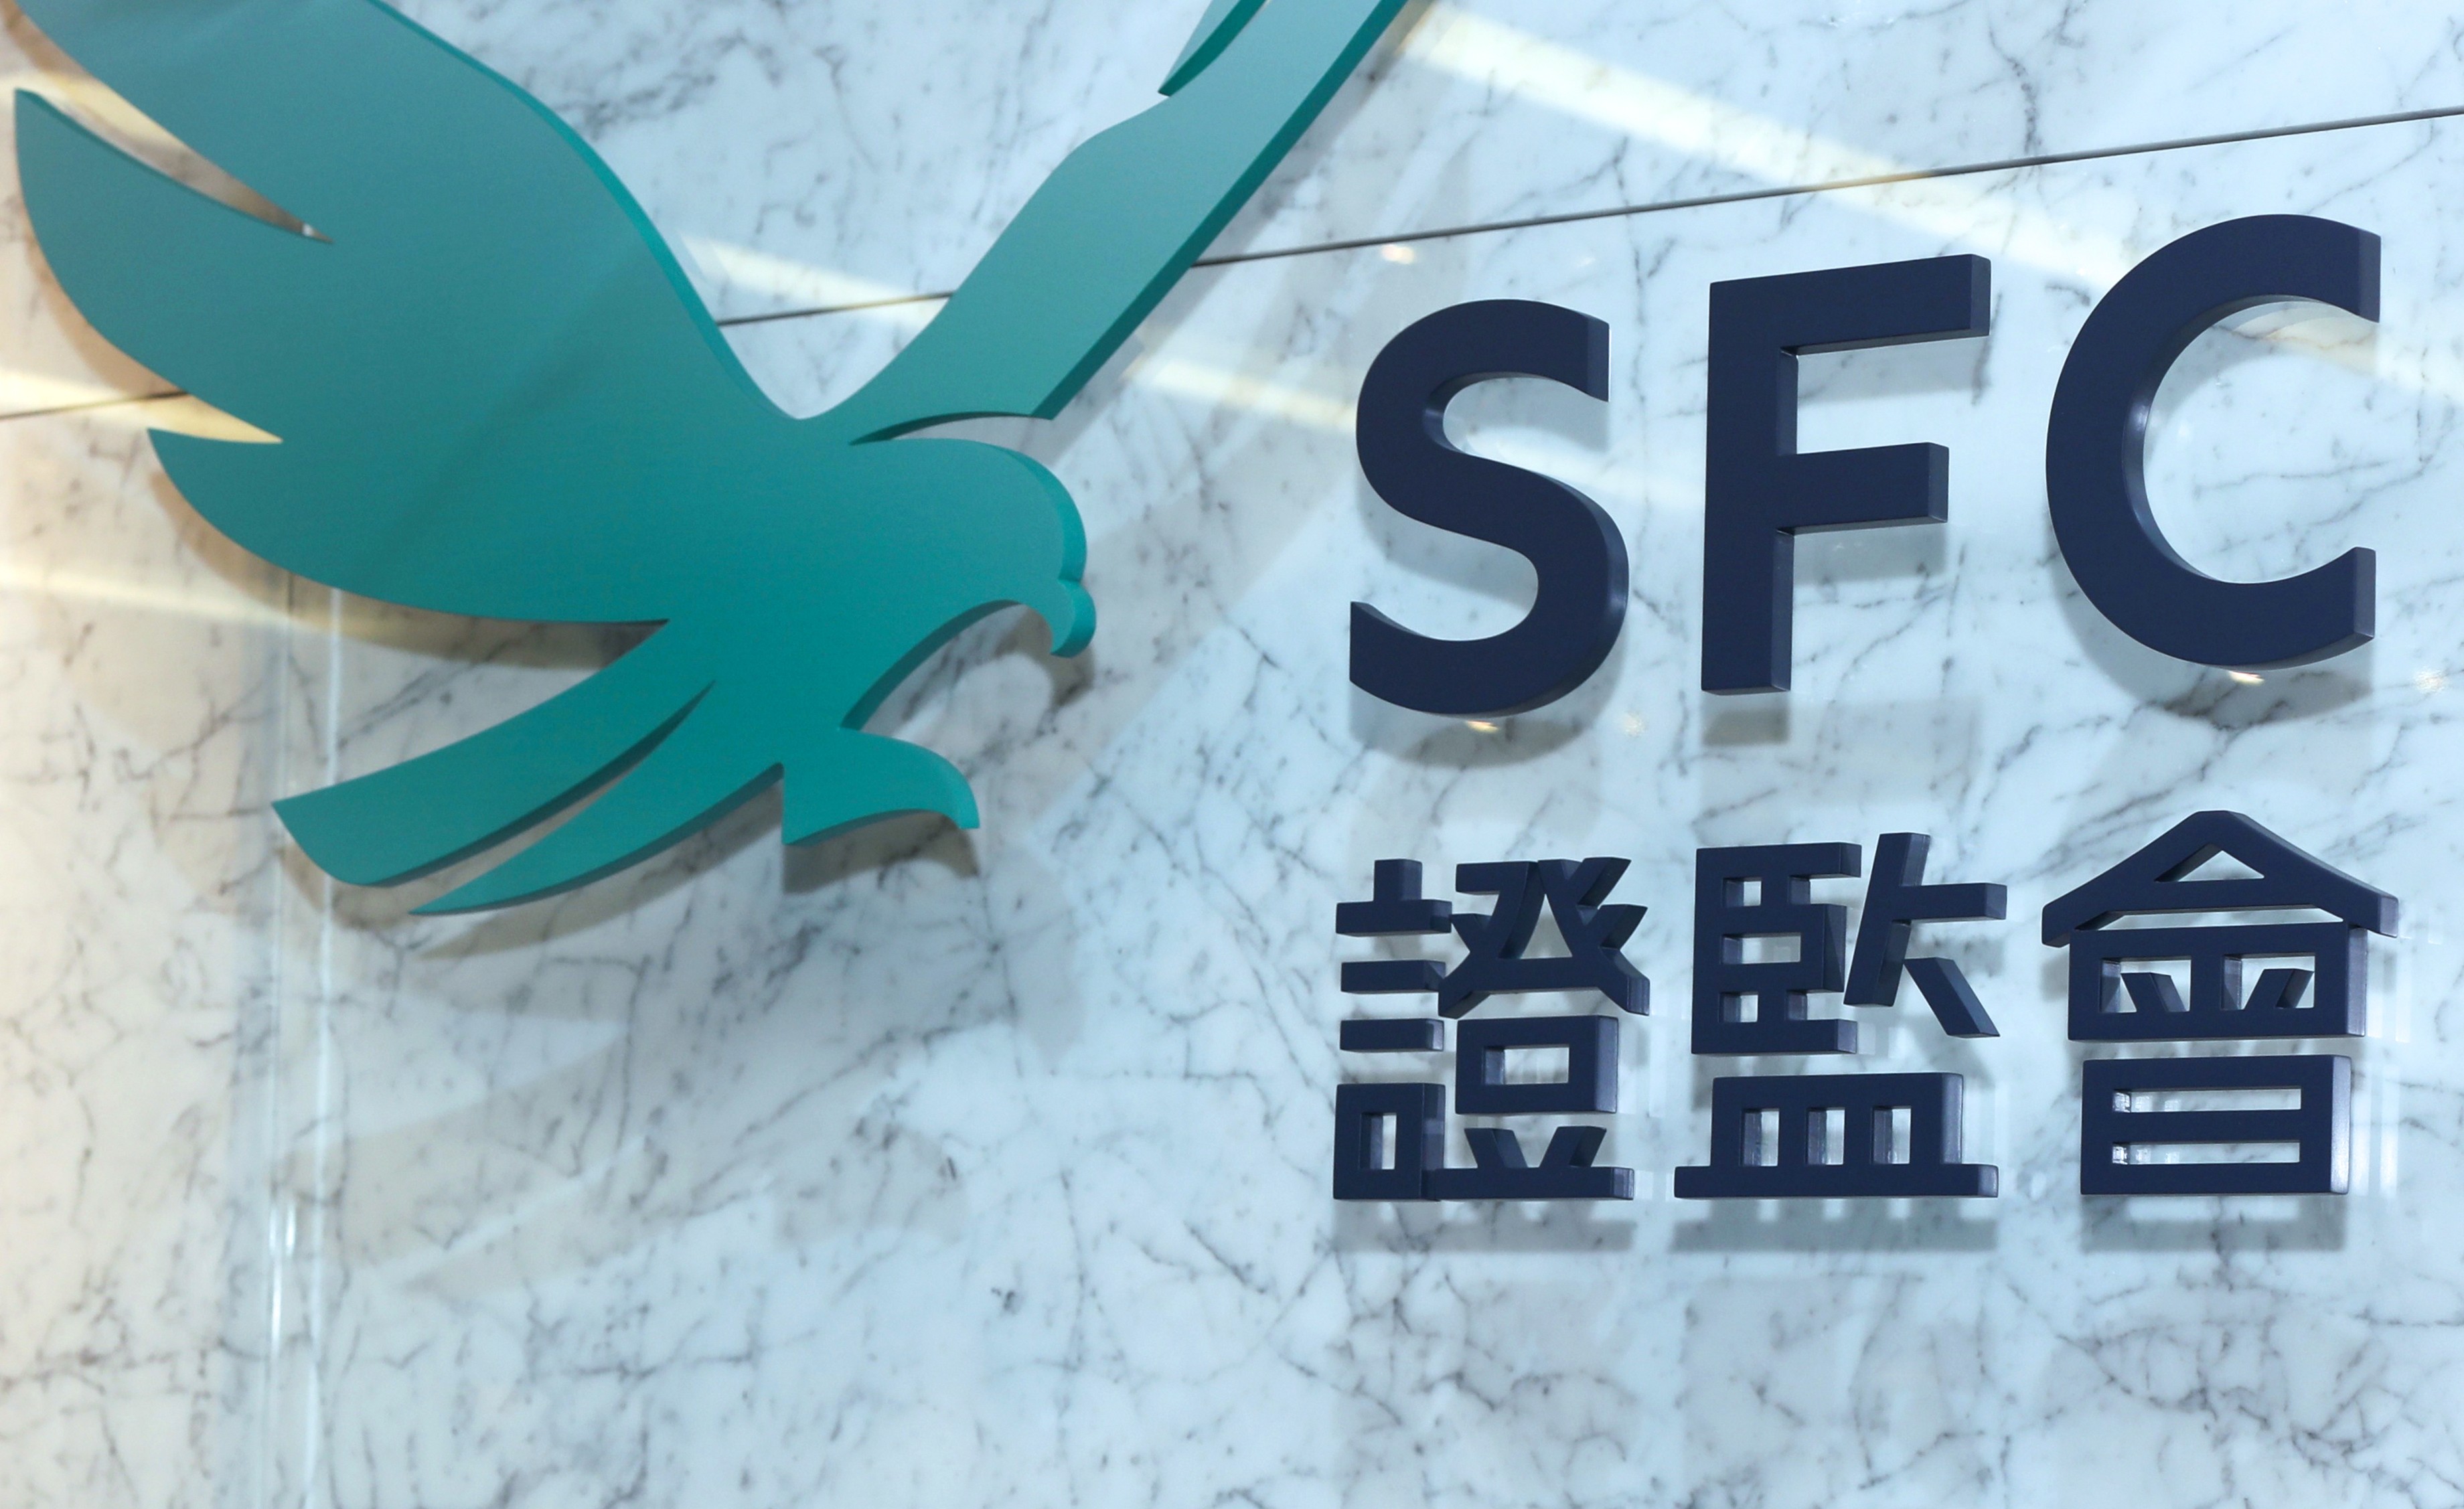 Hong Kong Watchdog Sfc Handed Out Record Hk 1 29 Billion In Fines